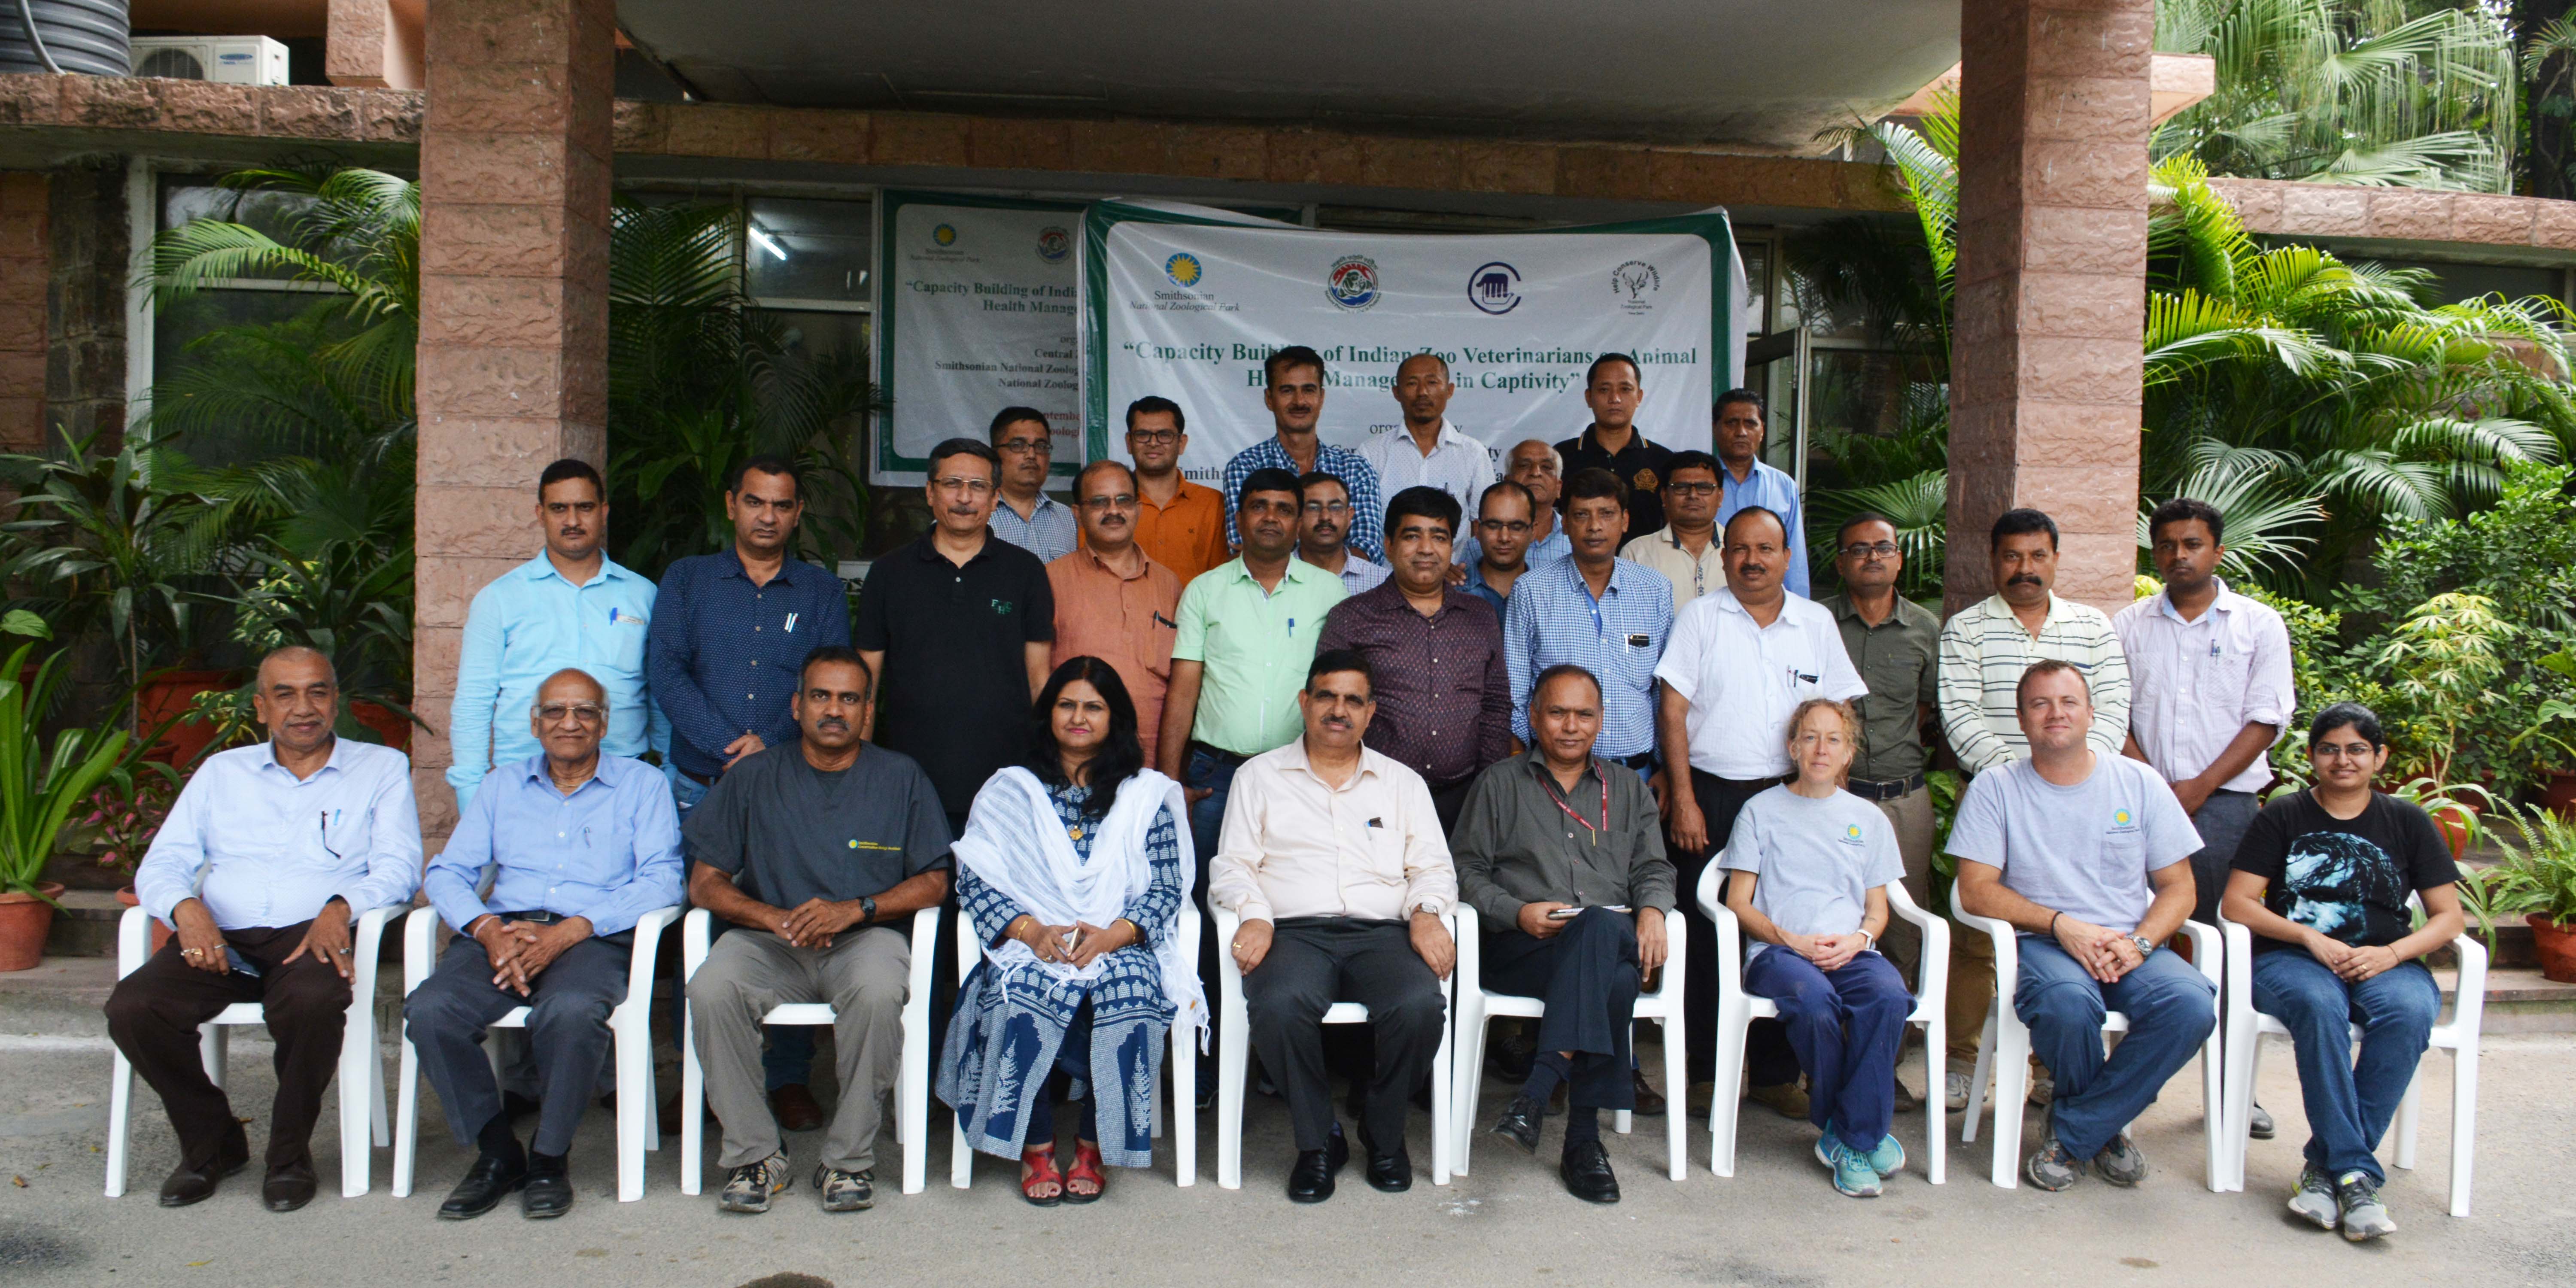 Smithsonian National Zoo and Conservation Biology Institute staff with Delhi Zoo staff.